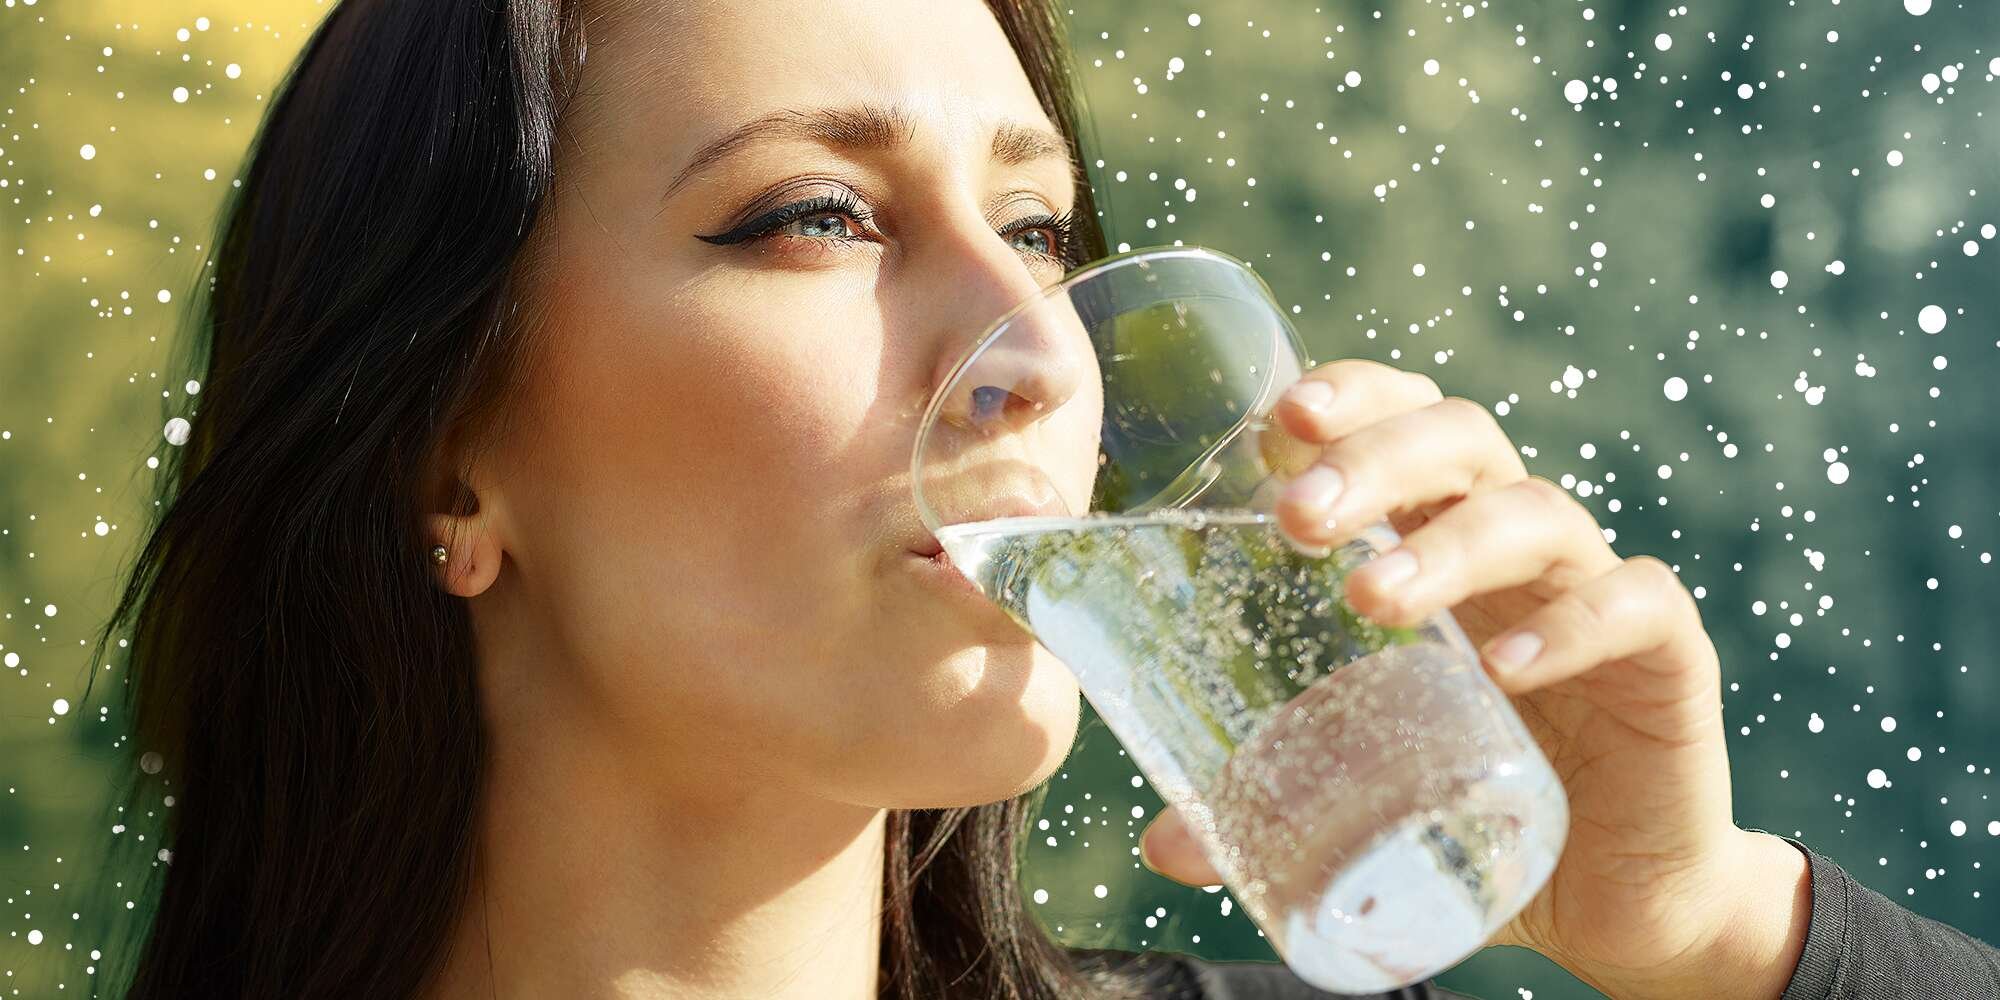 Here's What Happens to Your Body When You Drink Seltzer, According to Dietitians